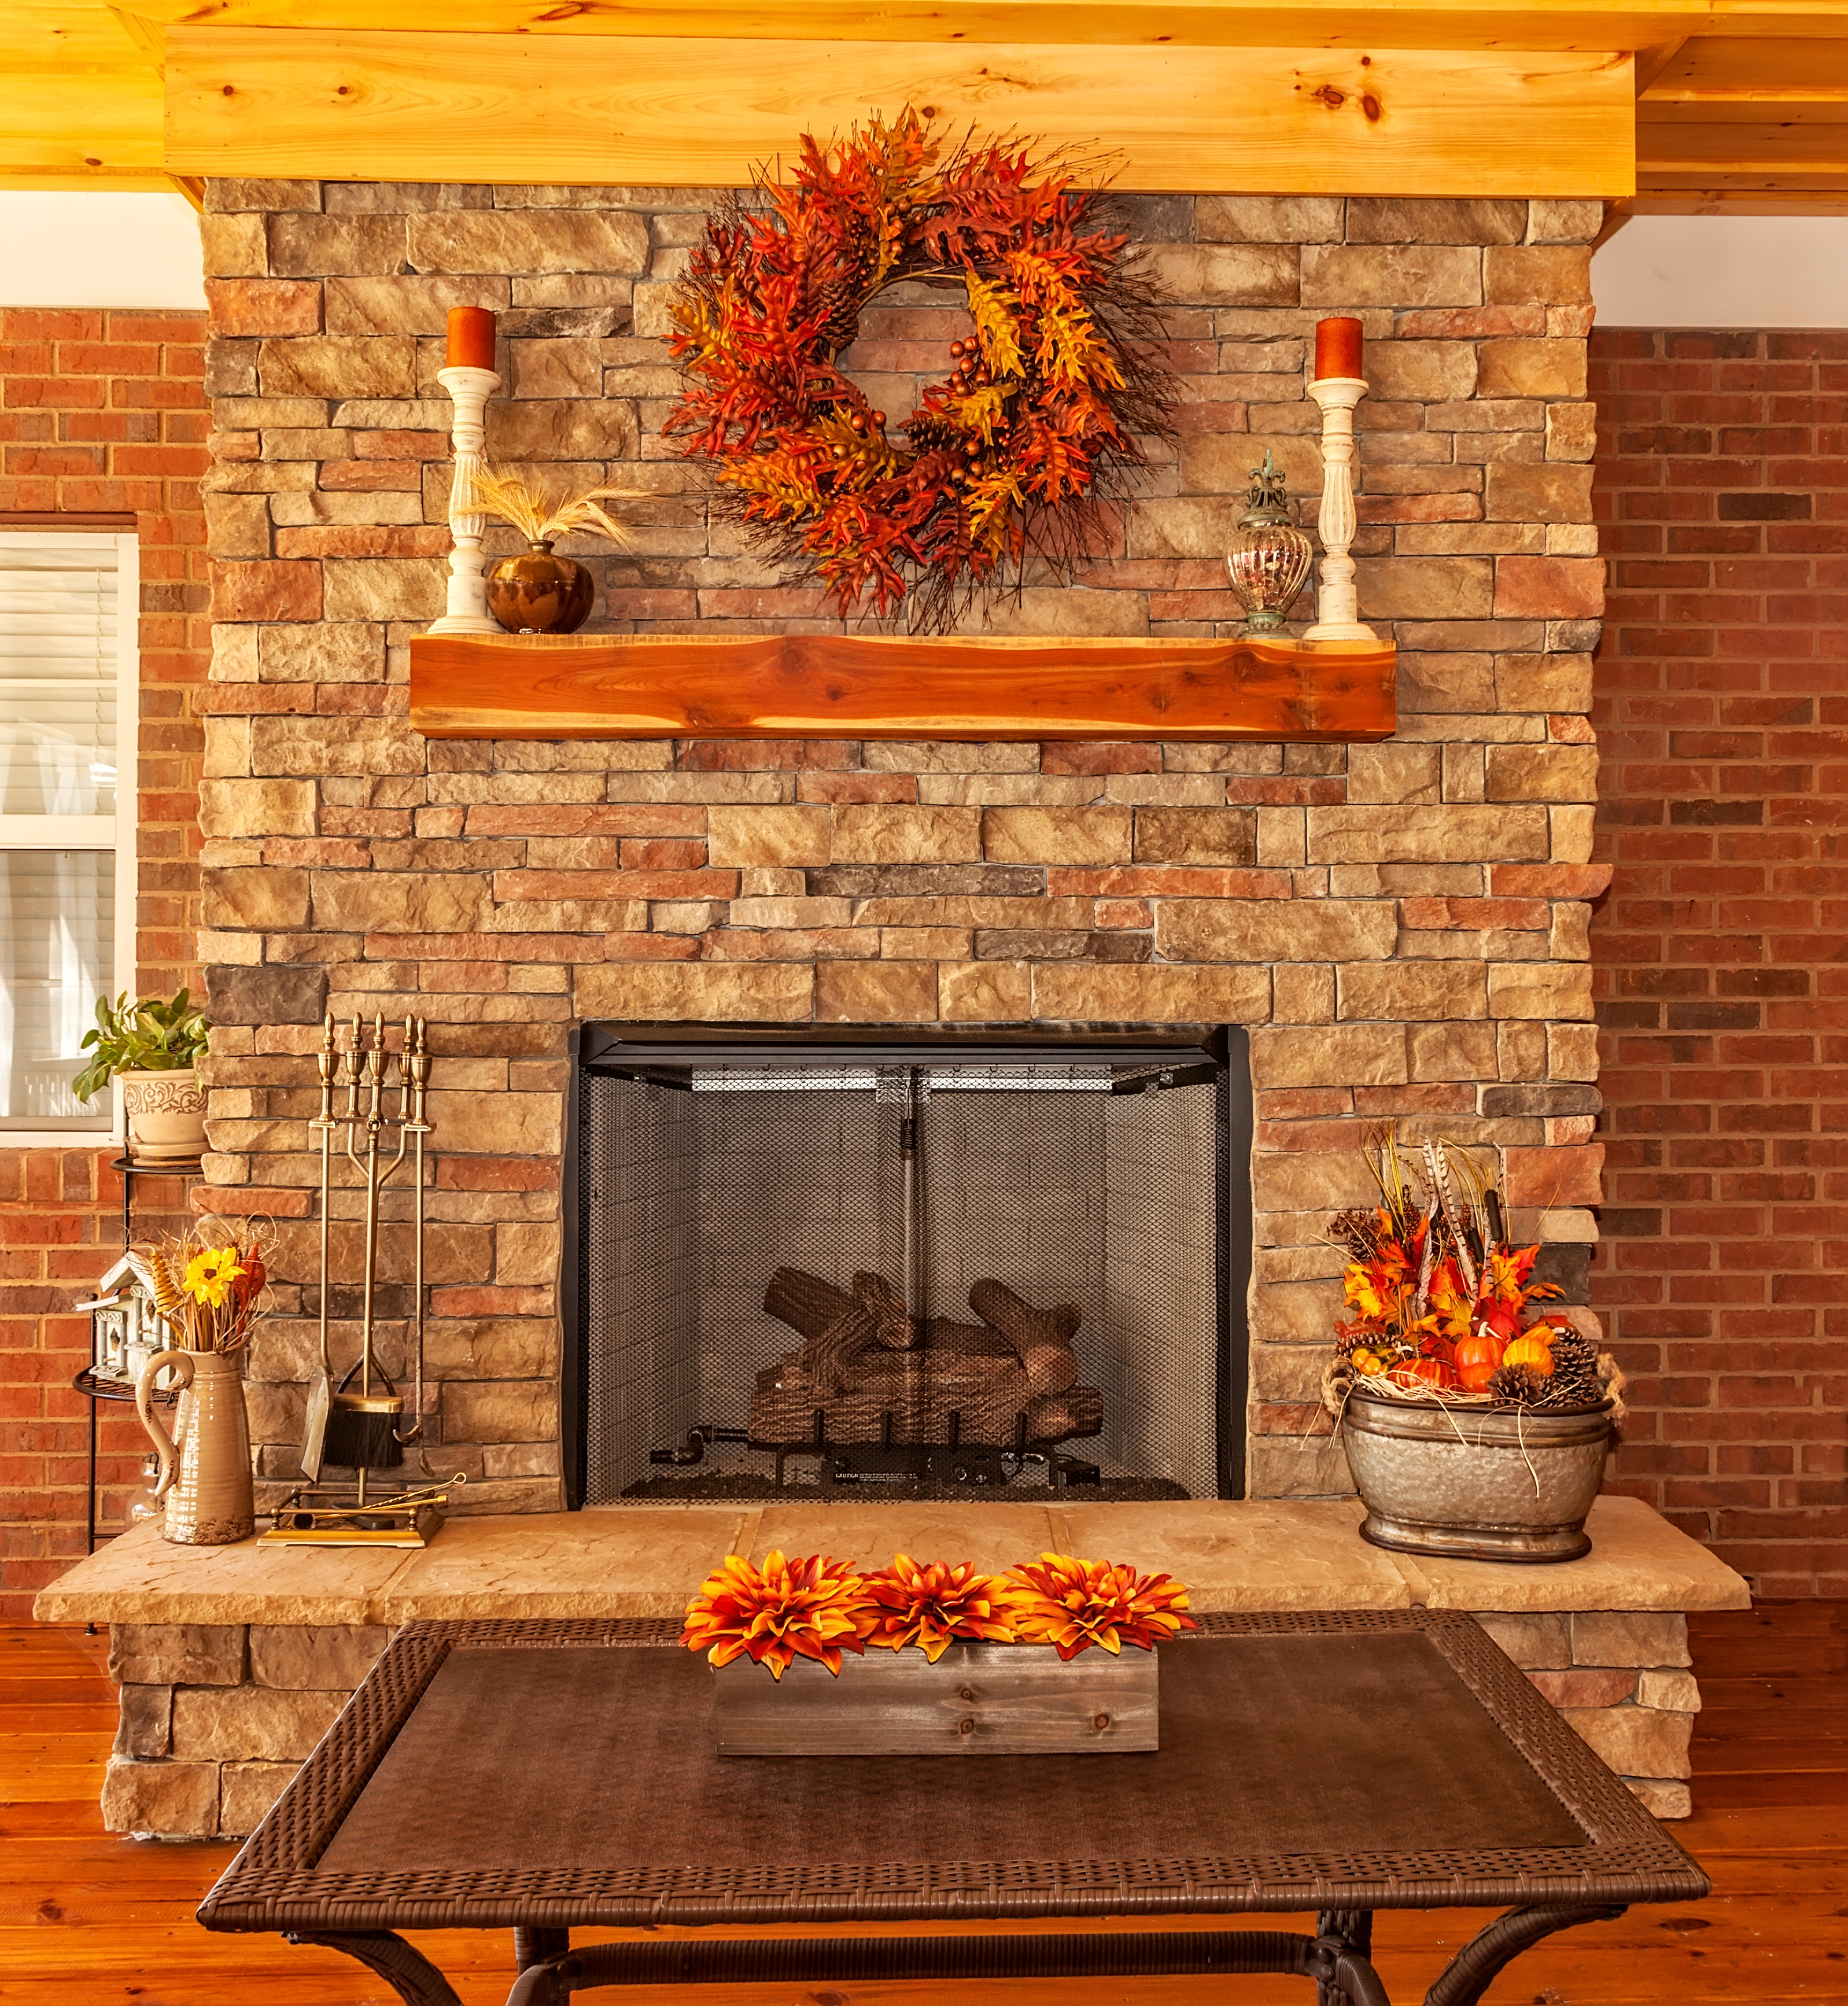 5 Fall Mantel Decorating Ideas That'll Make You Look Like a Pro 33